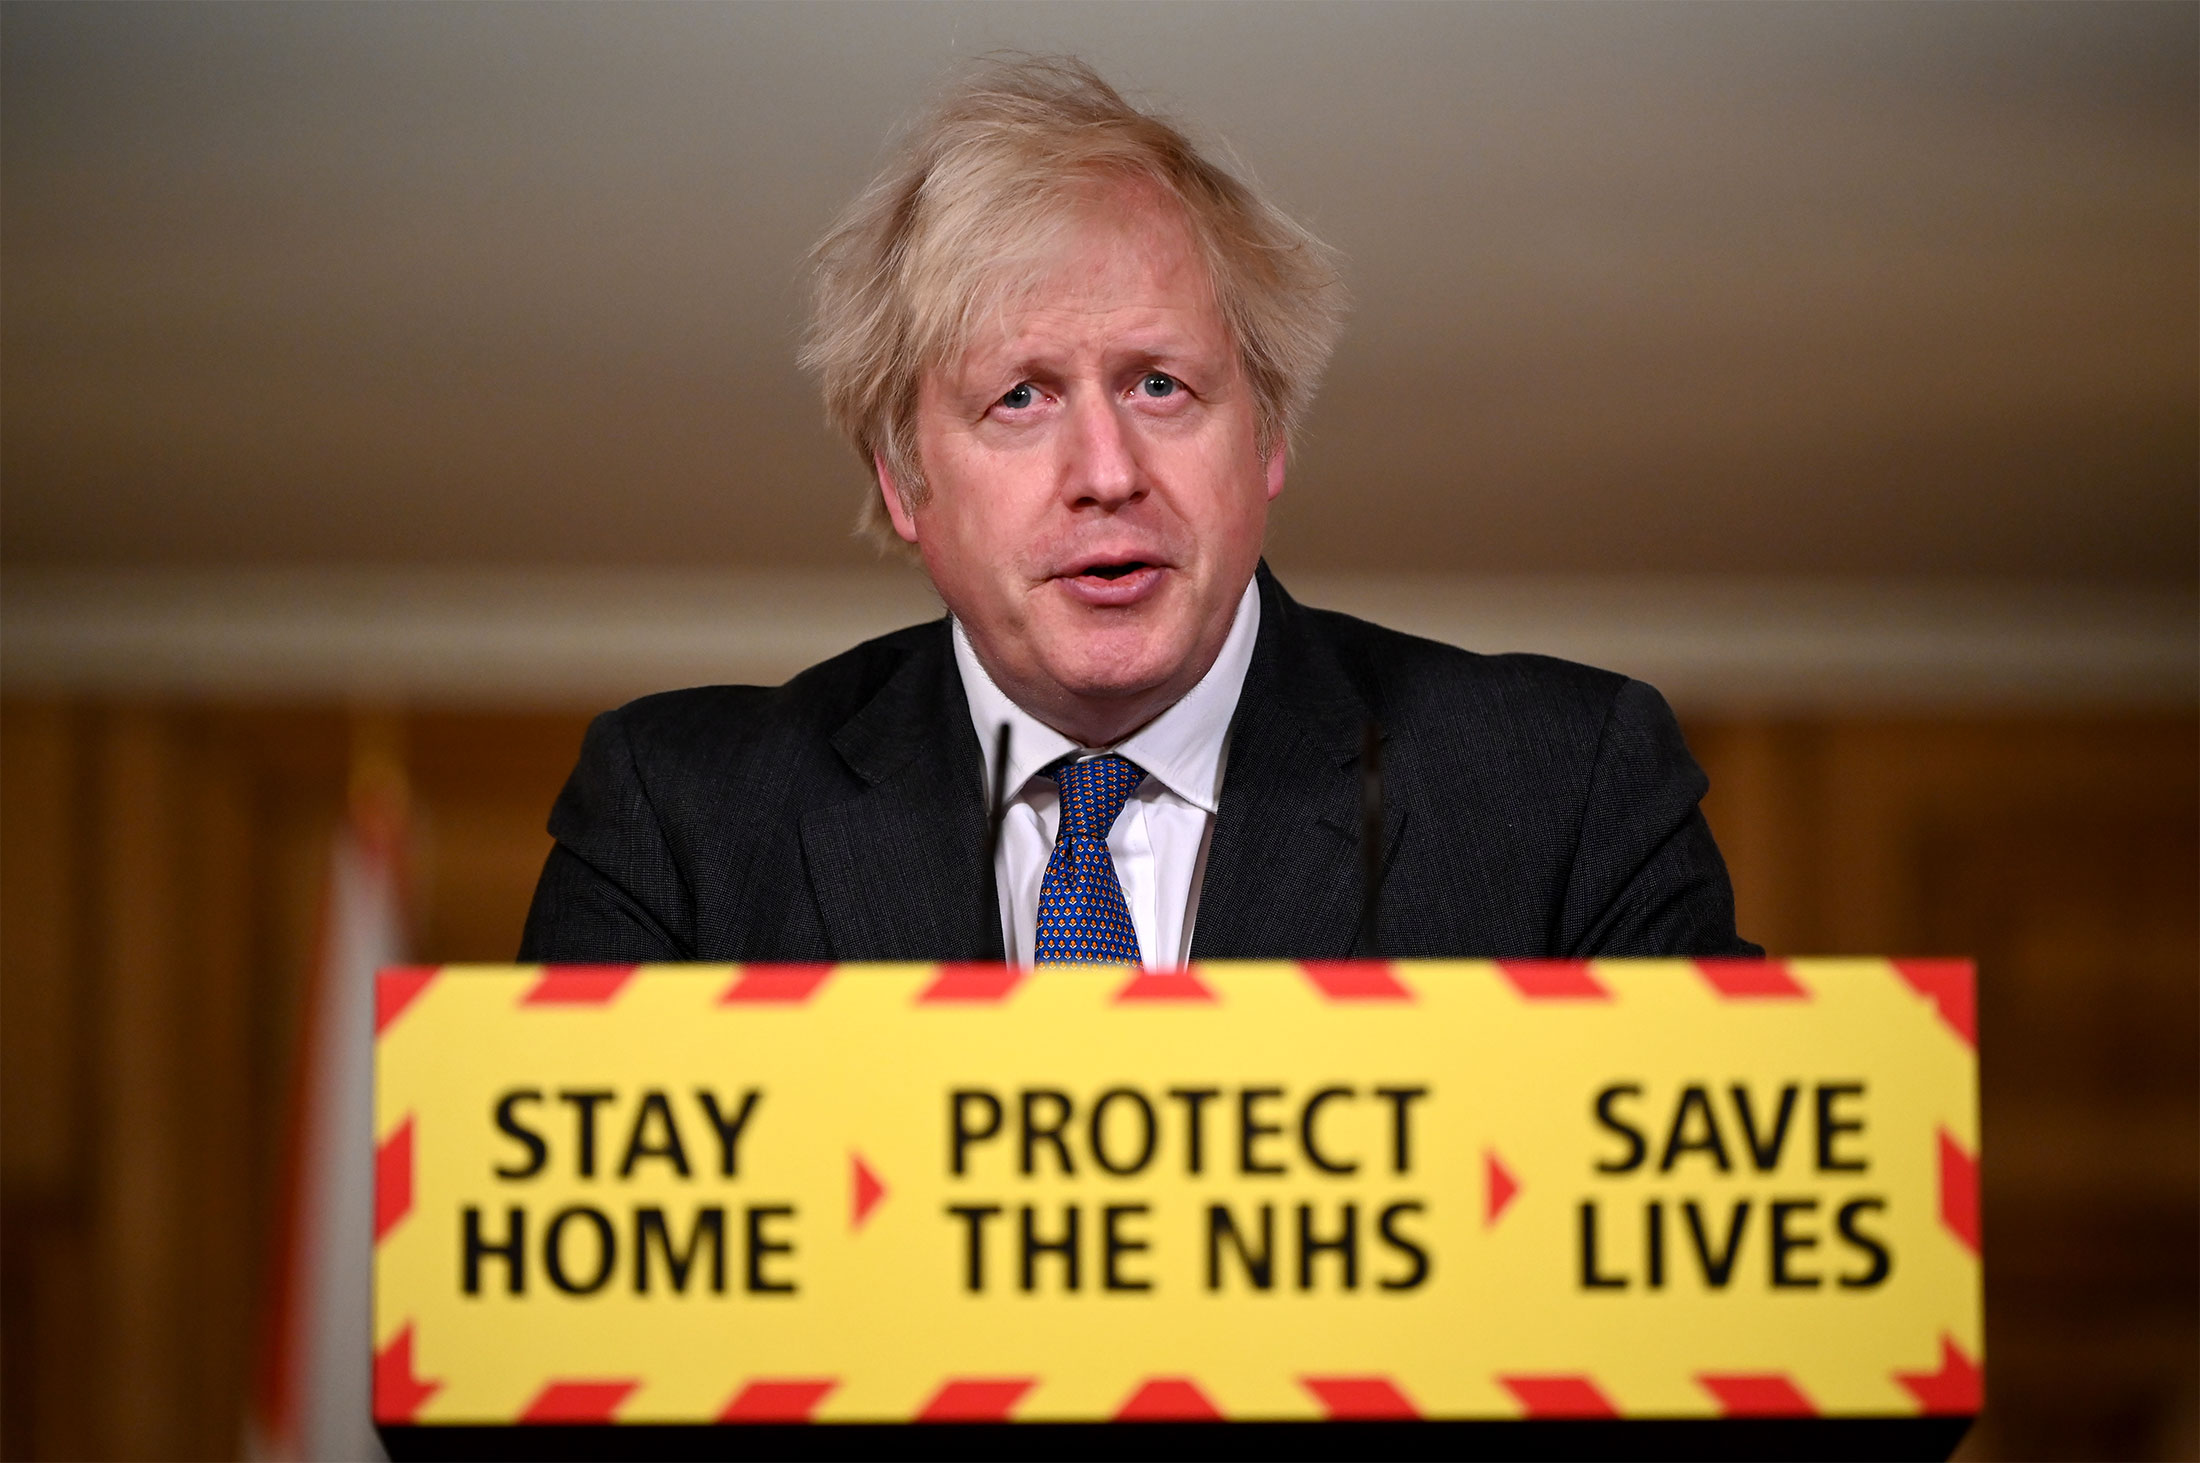 British Prime Minister Boris Johnson speaks during a coronavirus press conference at 10 Downing Street in London on January 22.